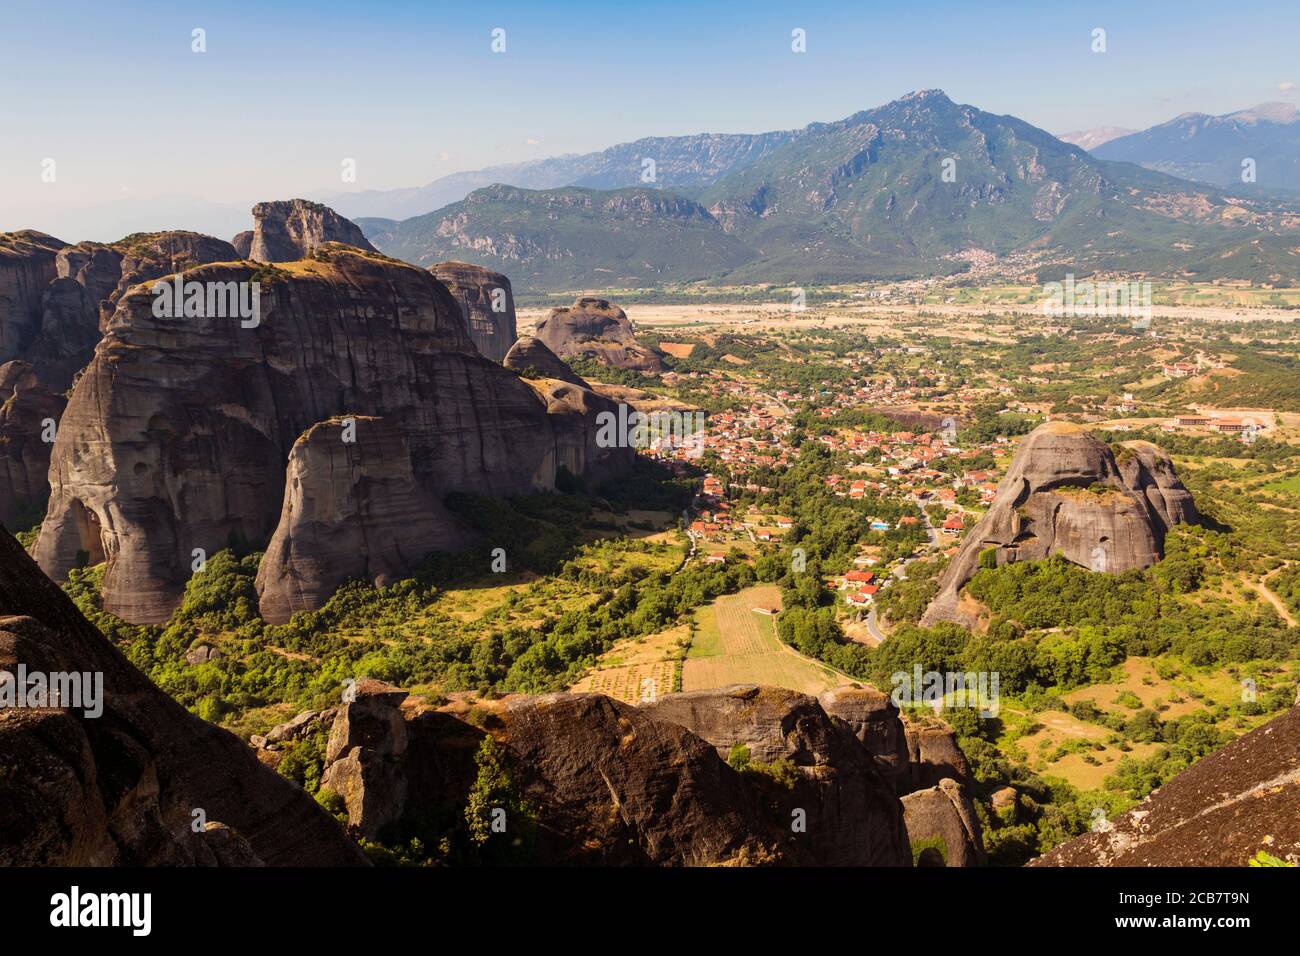 Meteora, Thessaly, Greece.  Looking down from the mountains to the Plain of Thessaly and the town of Kastraki.  Meteora is a UNESCO World Heritage Sit Stock Photo